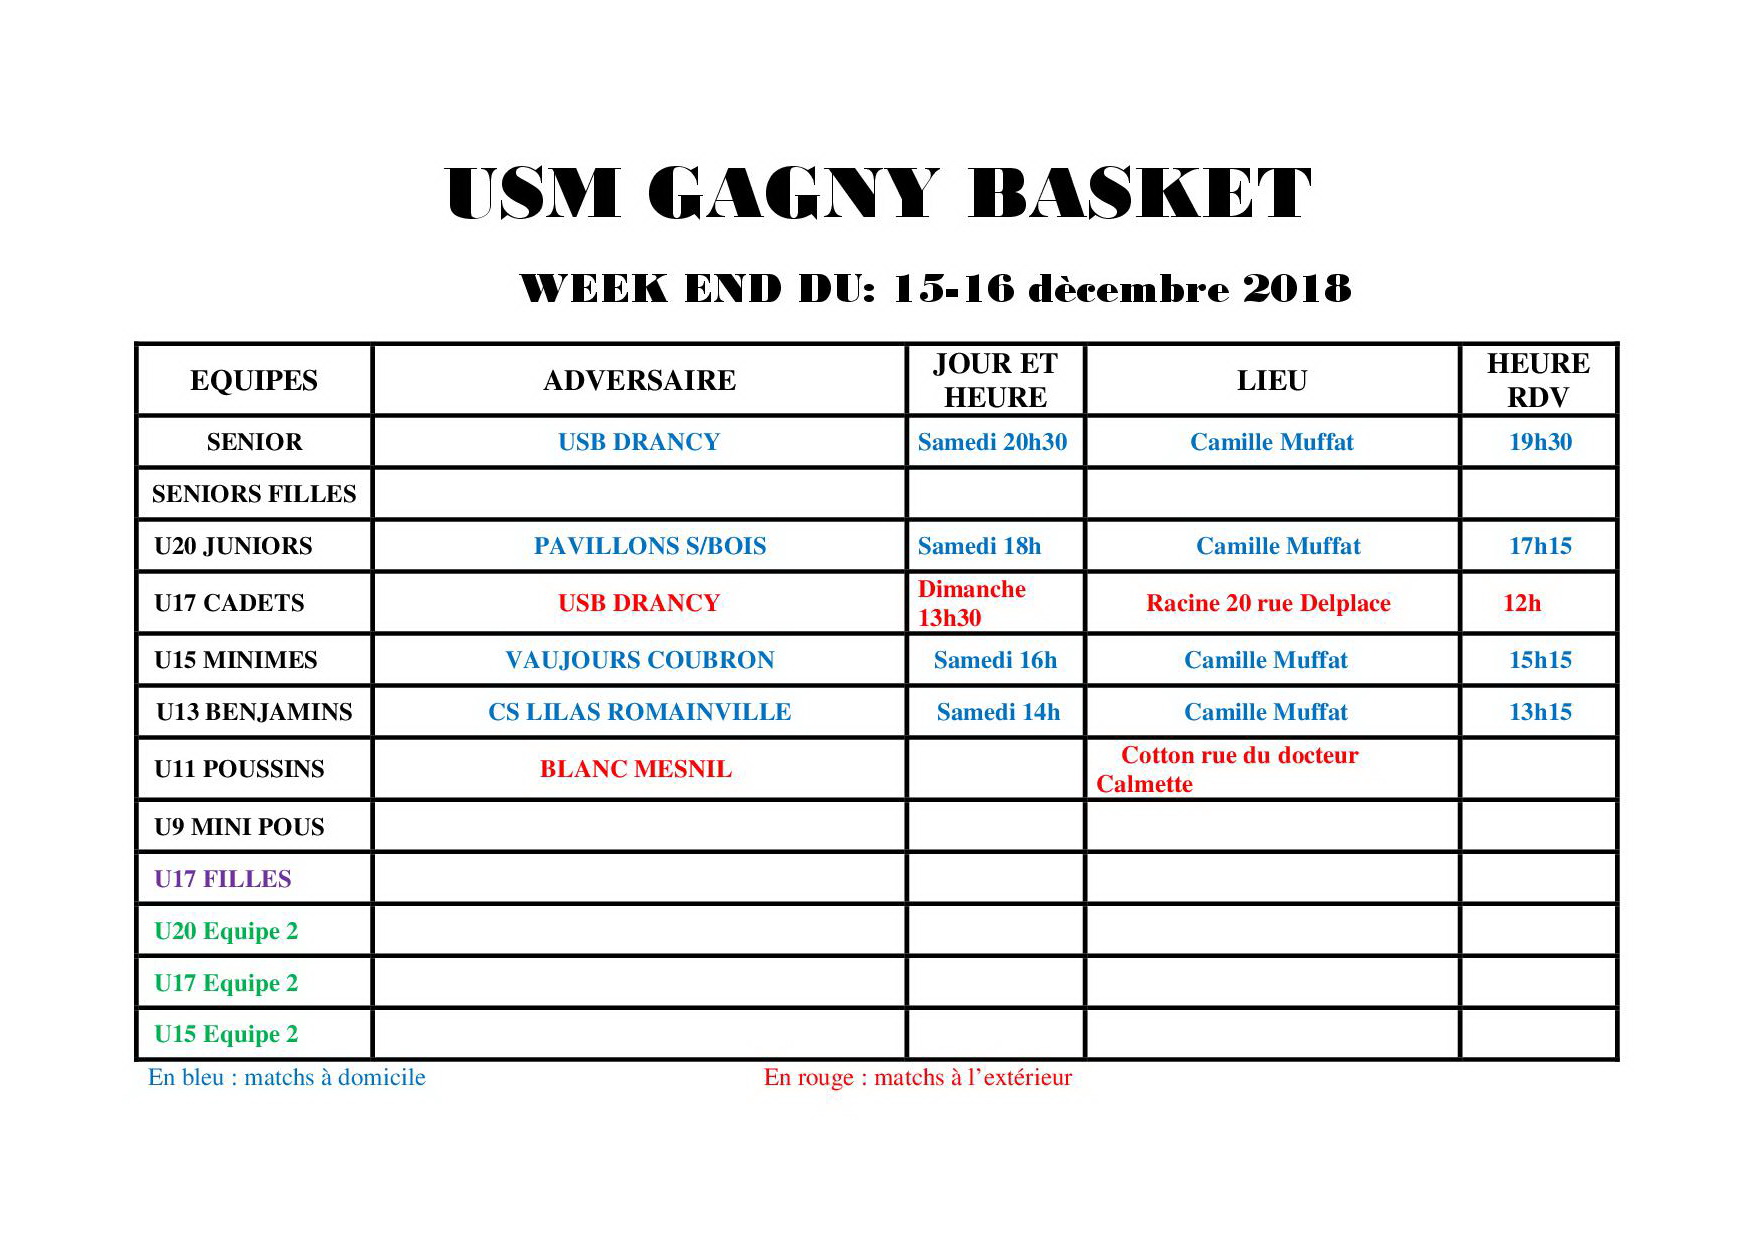 Usmg gagny planning week end 15 16 decembre 2018